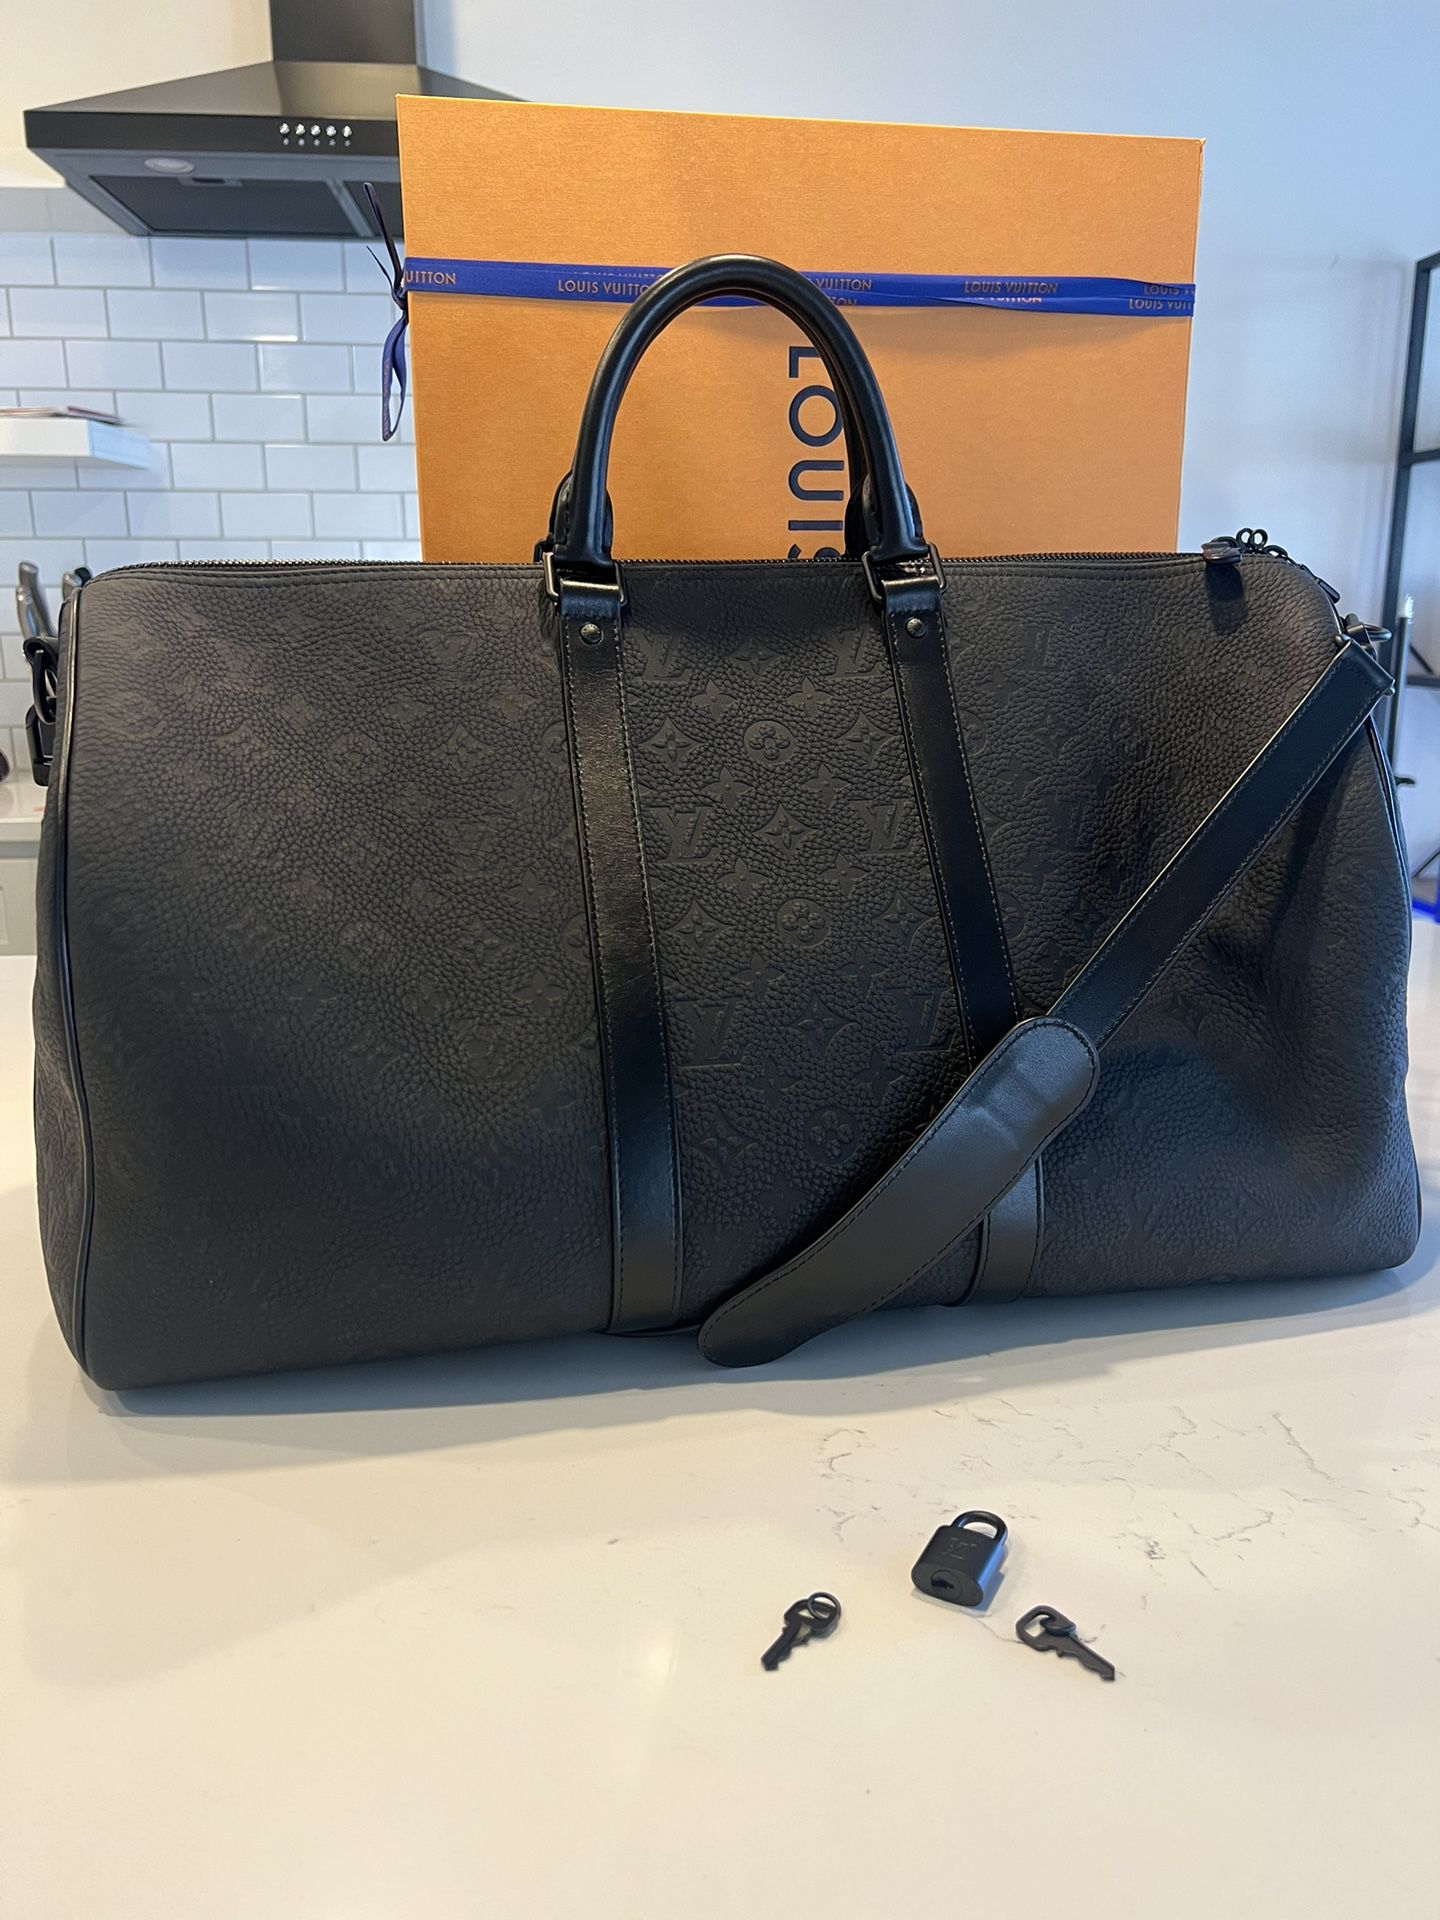 Louis Vuitton Bandouliere Keepall 50 for Sale in Pineville, NC